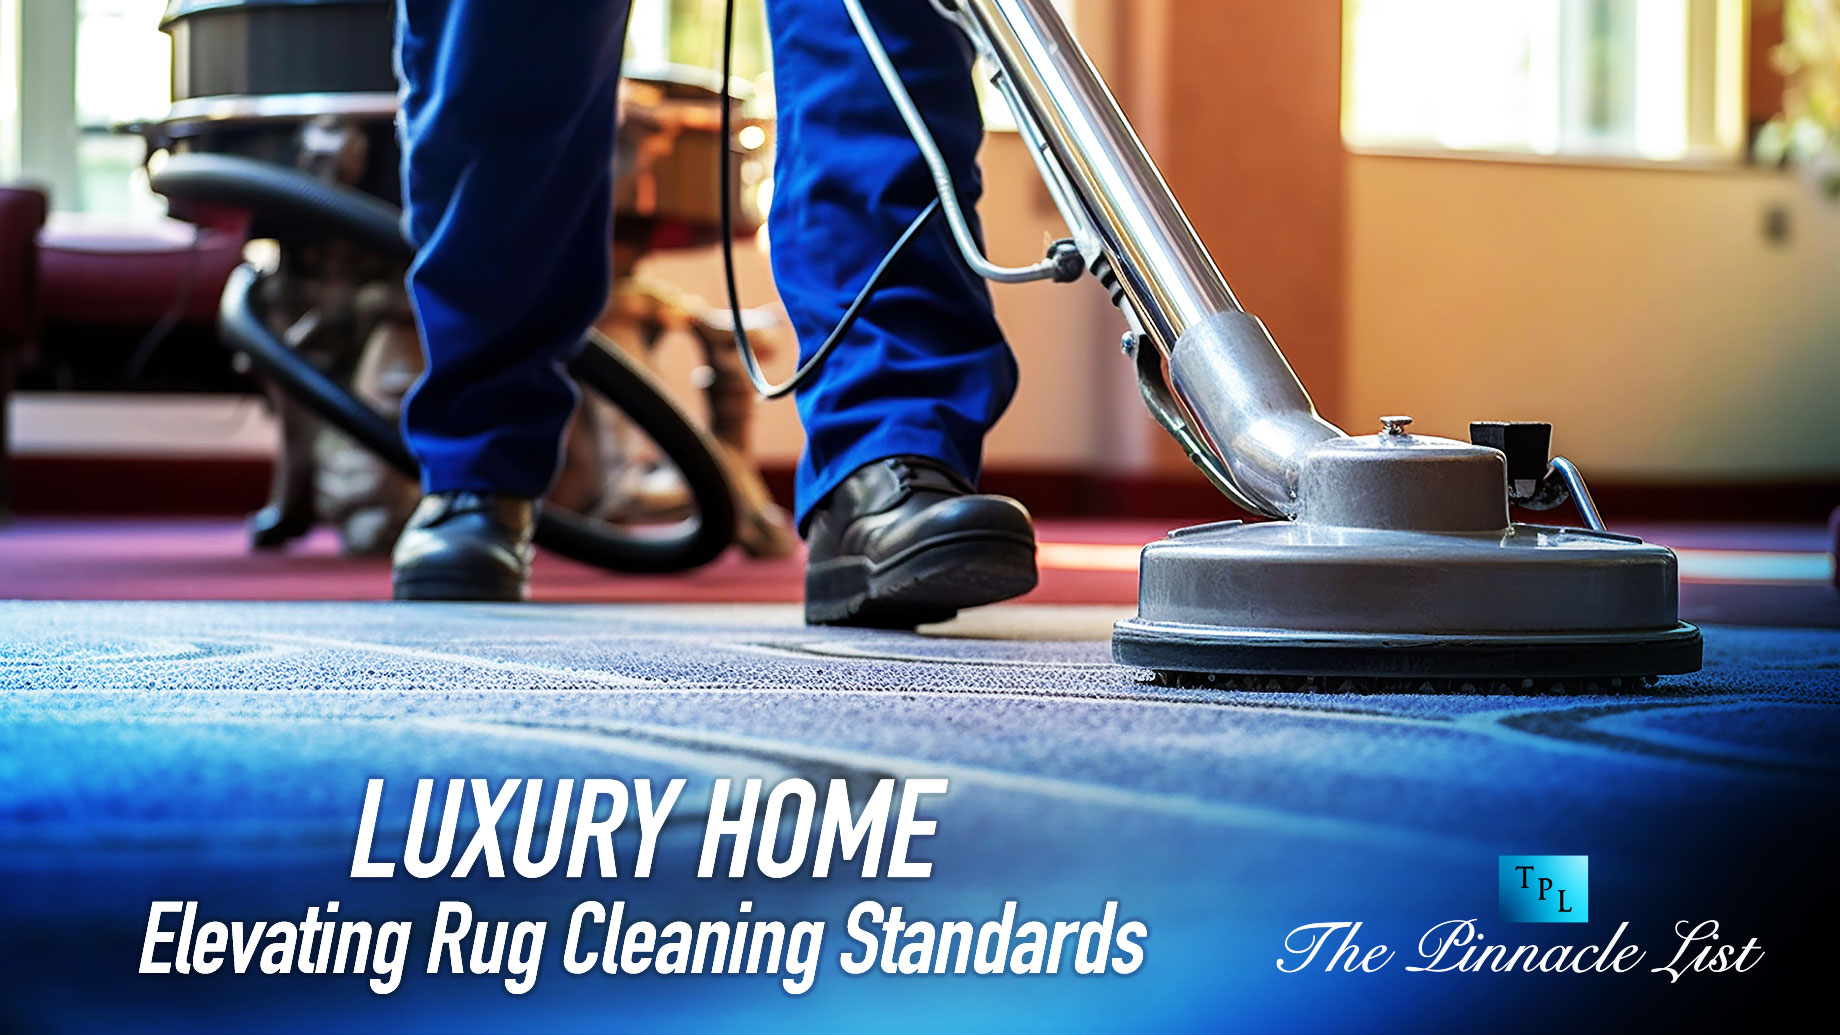 Luxury Home: Elevating Rug Cleaning Standards